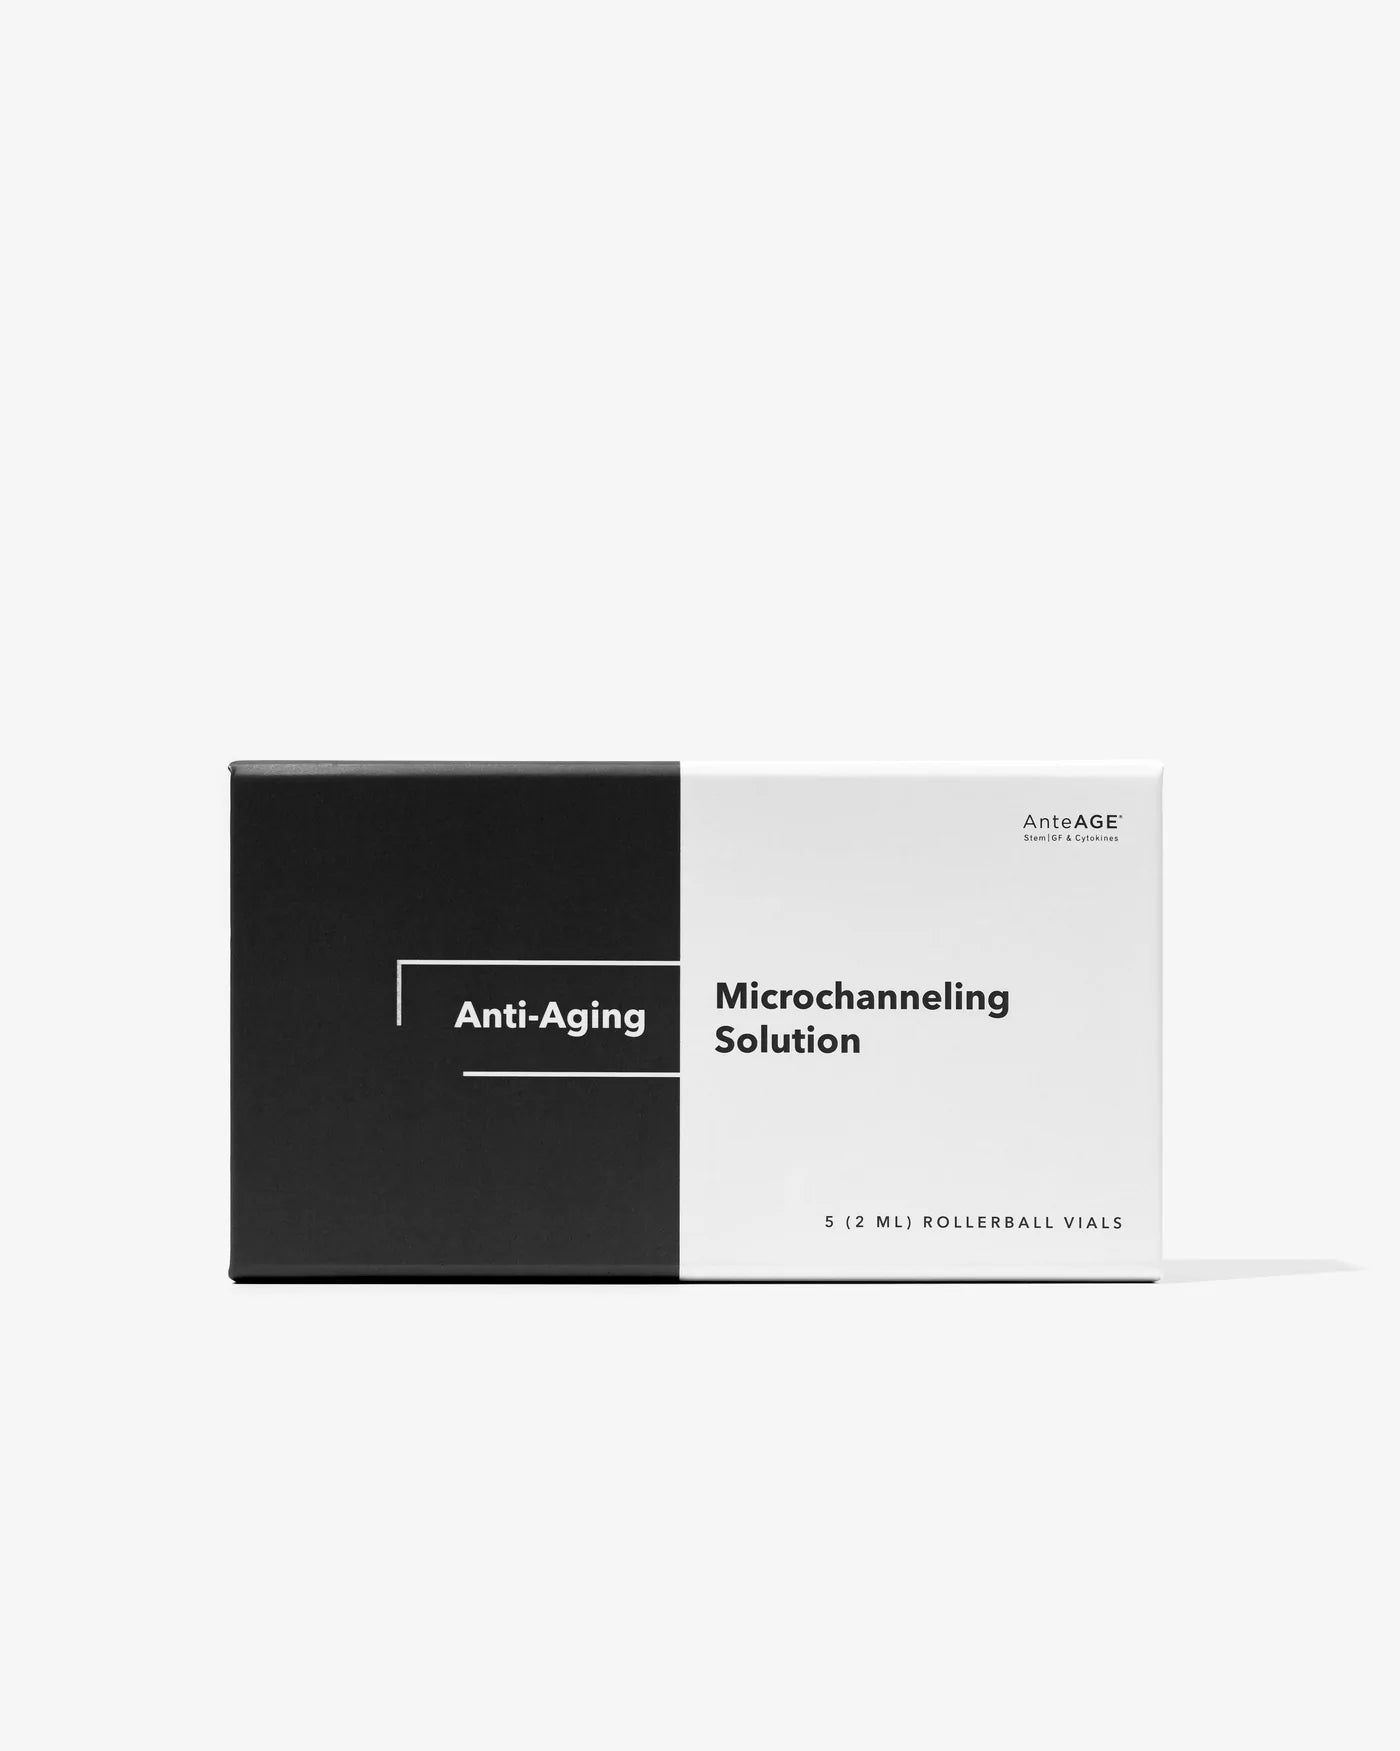 AnteAGE® Anti-Aging Microchanneling Solution